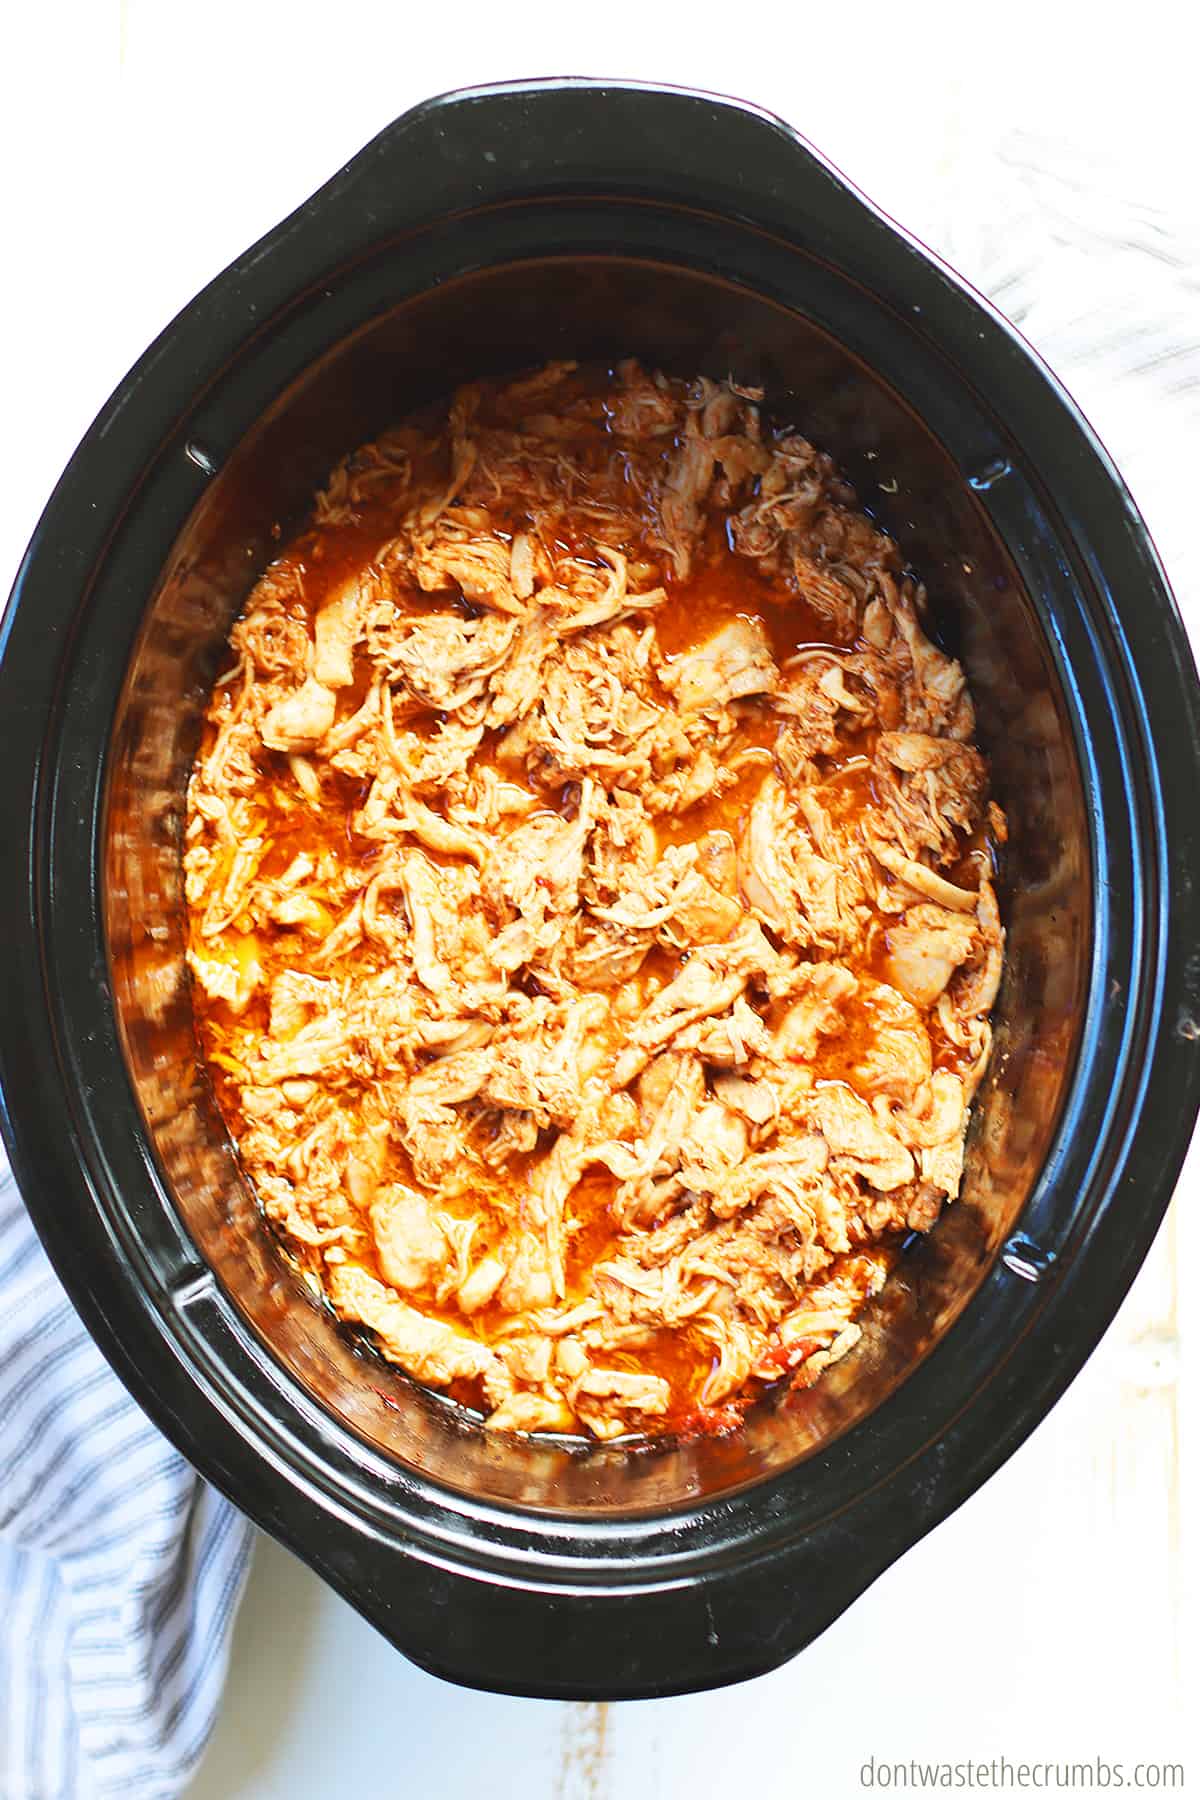 Shredded chicken in a slow cooker. This makes slow cooker chicken tacos.